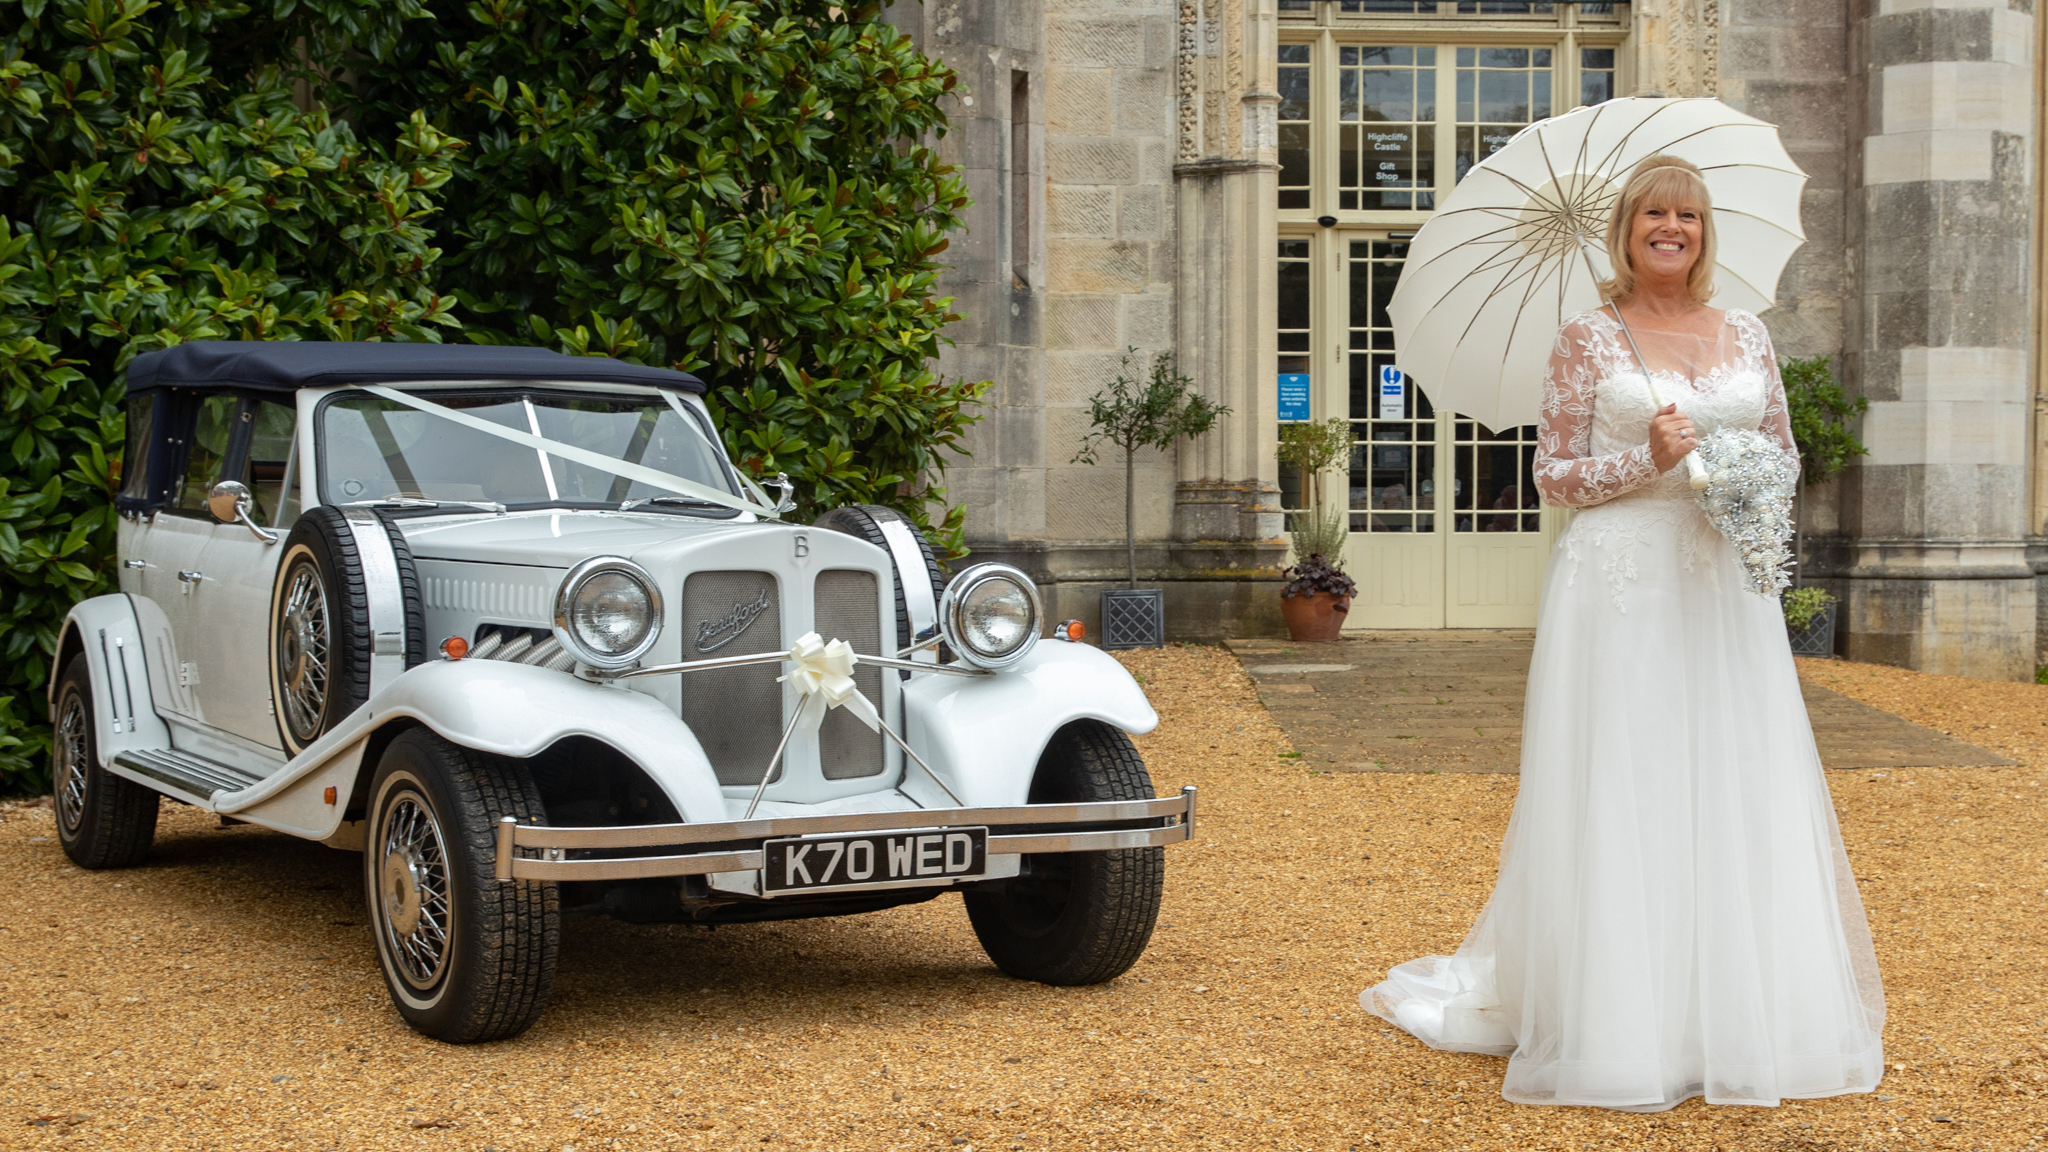 White vintage Beauford convertible with roof up decorated with white ribbon and bow at a local Cranbrook wedding. Smiling bride standing next to the vehicle with a white umbrella h